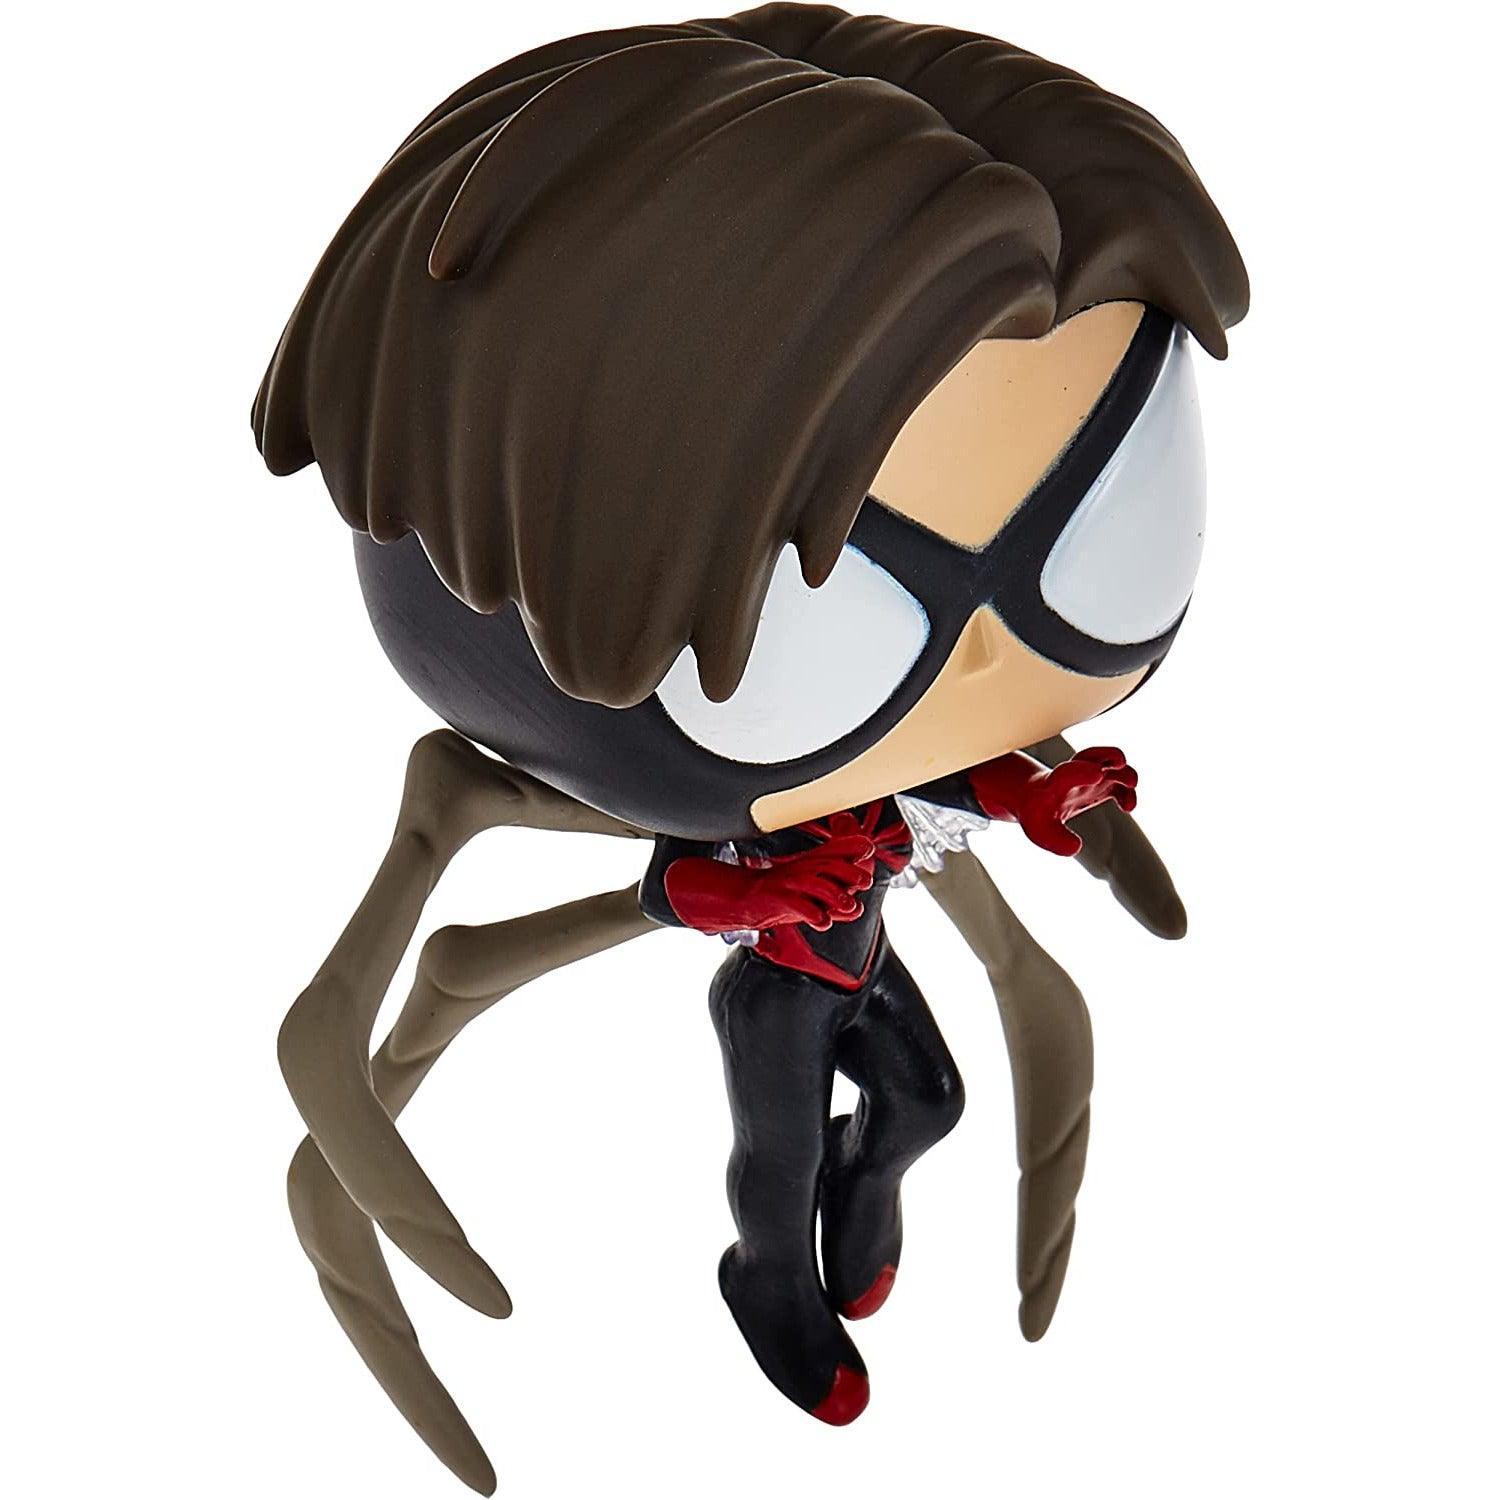 Funko Pop Marvel: Beyond Amazing - Spider-Woman Mattie Franklin - BumbleToys - 18+, 4+ Years, 5-7 Years, Action Figures, Avengers, Boys, Characters, Funko, Girls, Pre-Order